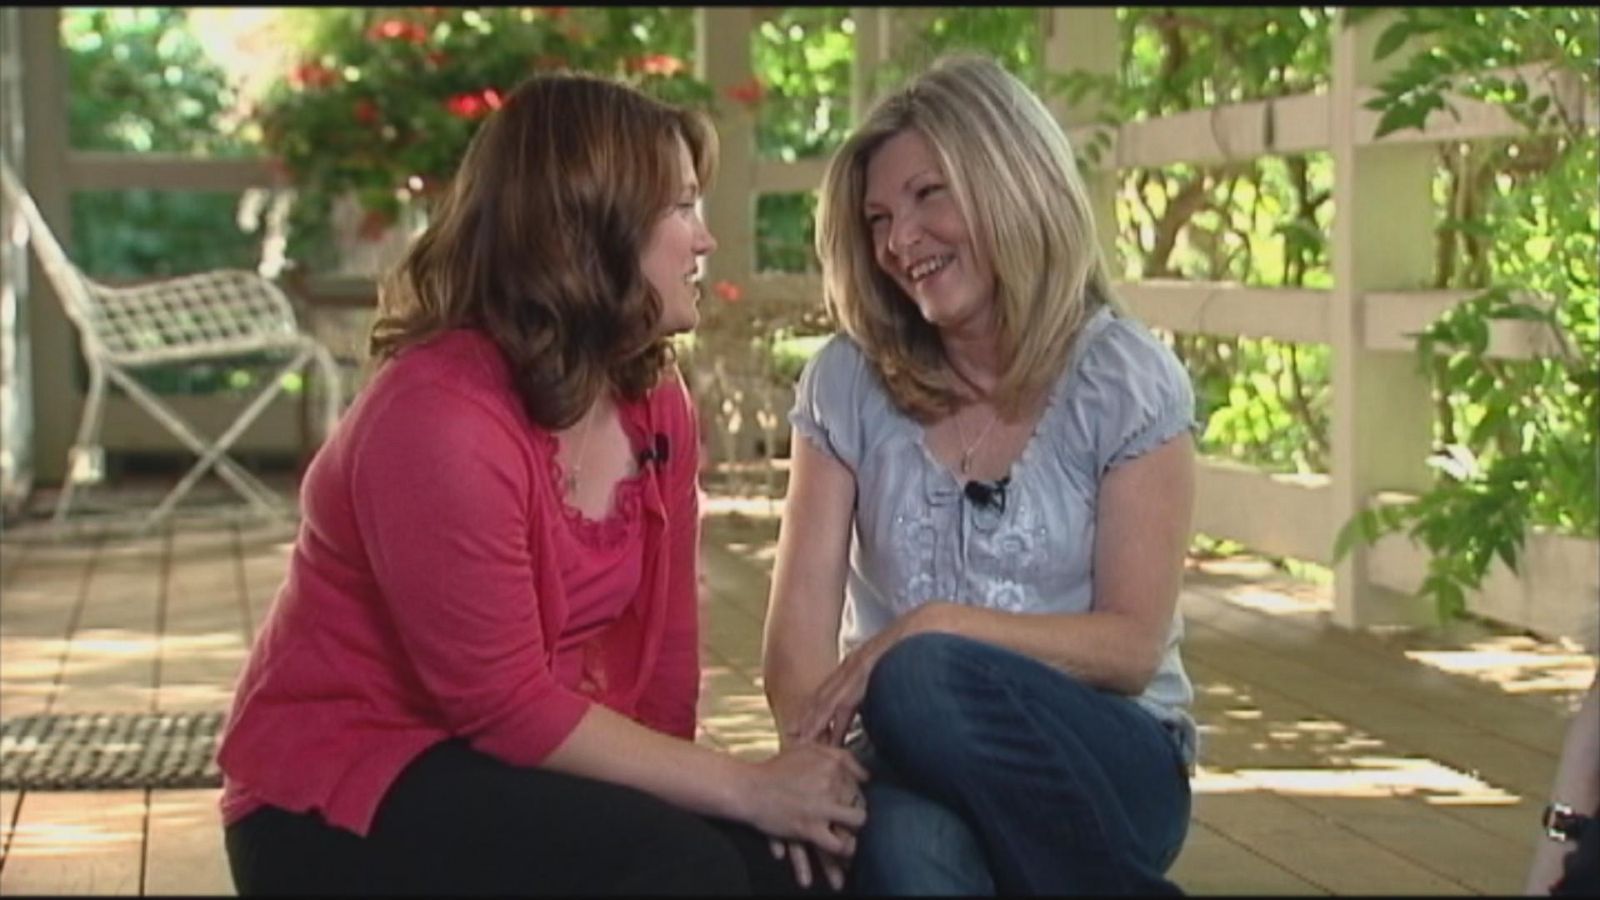 Jaycee Dugard Revisits Items She Has Checked Off 'Dreams' List She Wrote as  a Captive - ABC News